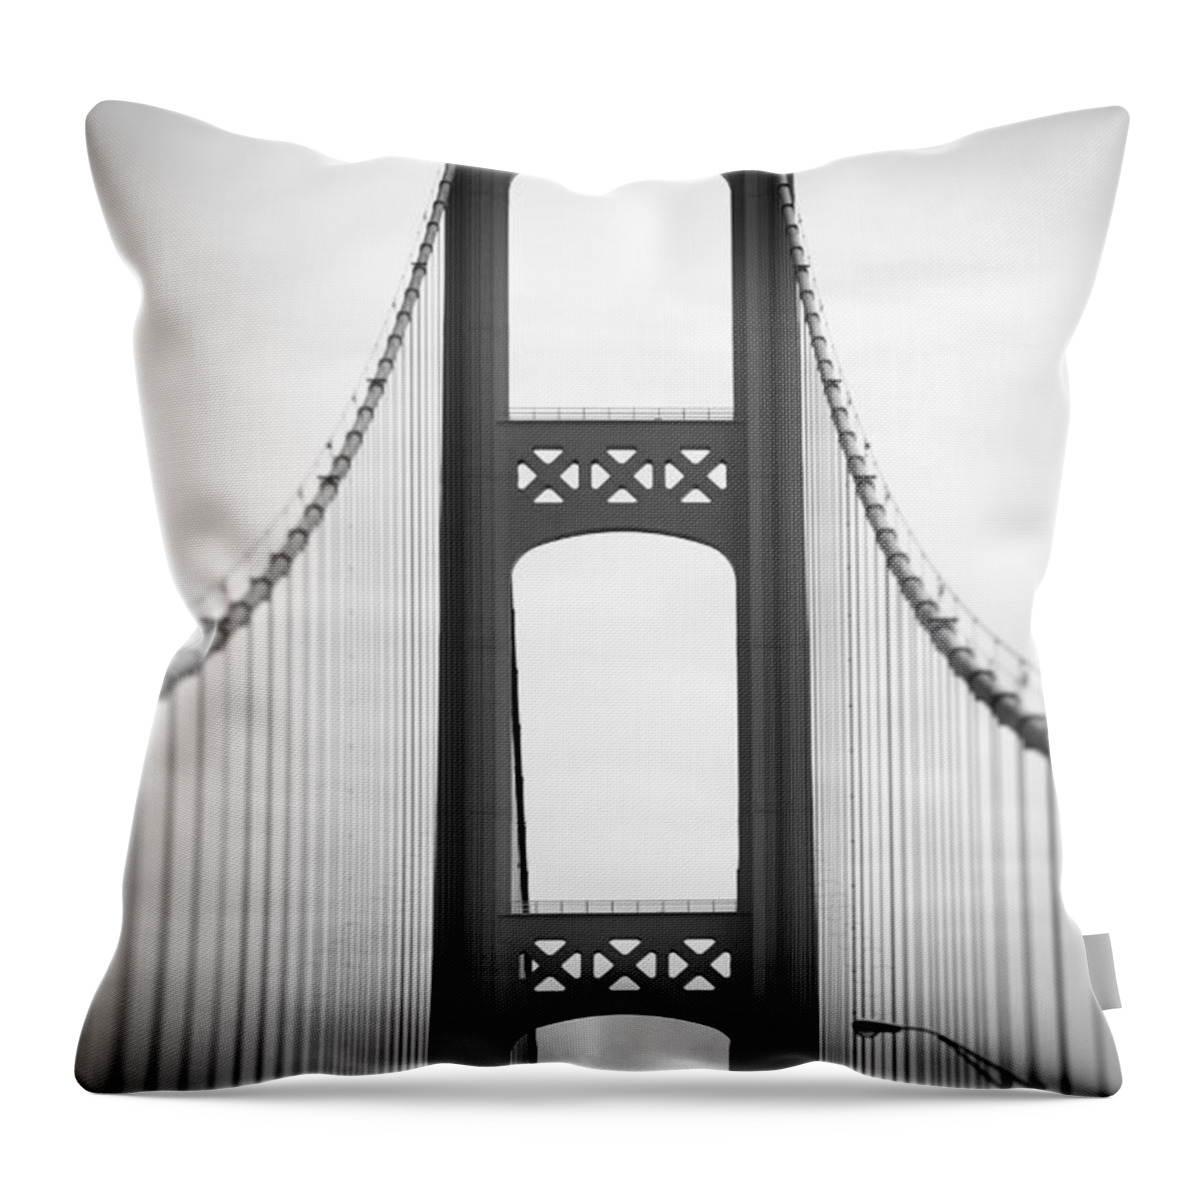 Bridge Throw Pillow featuring the photograph Lwv50047 by Lee Winter